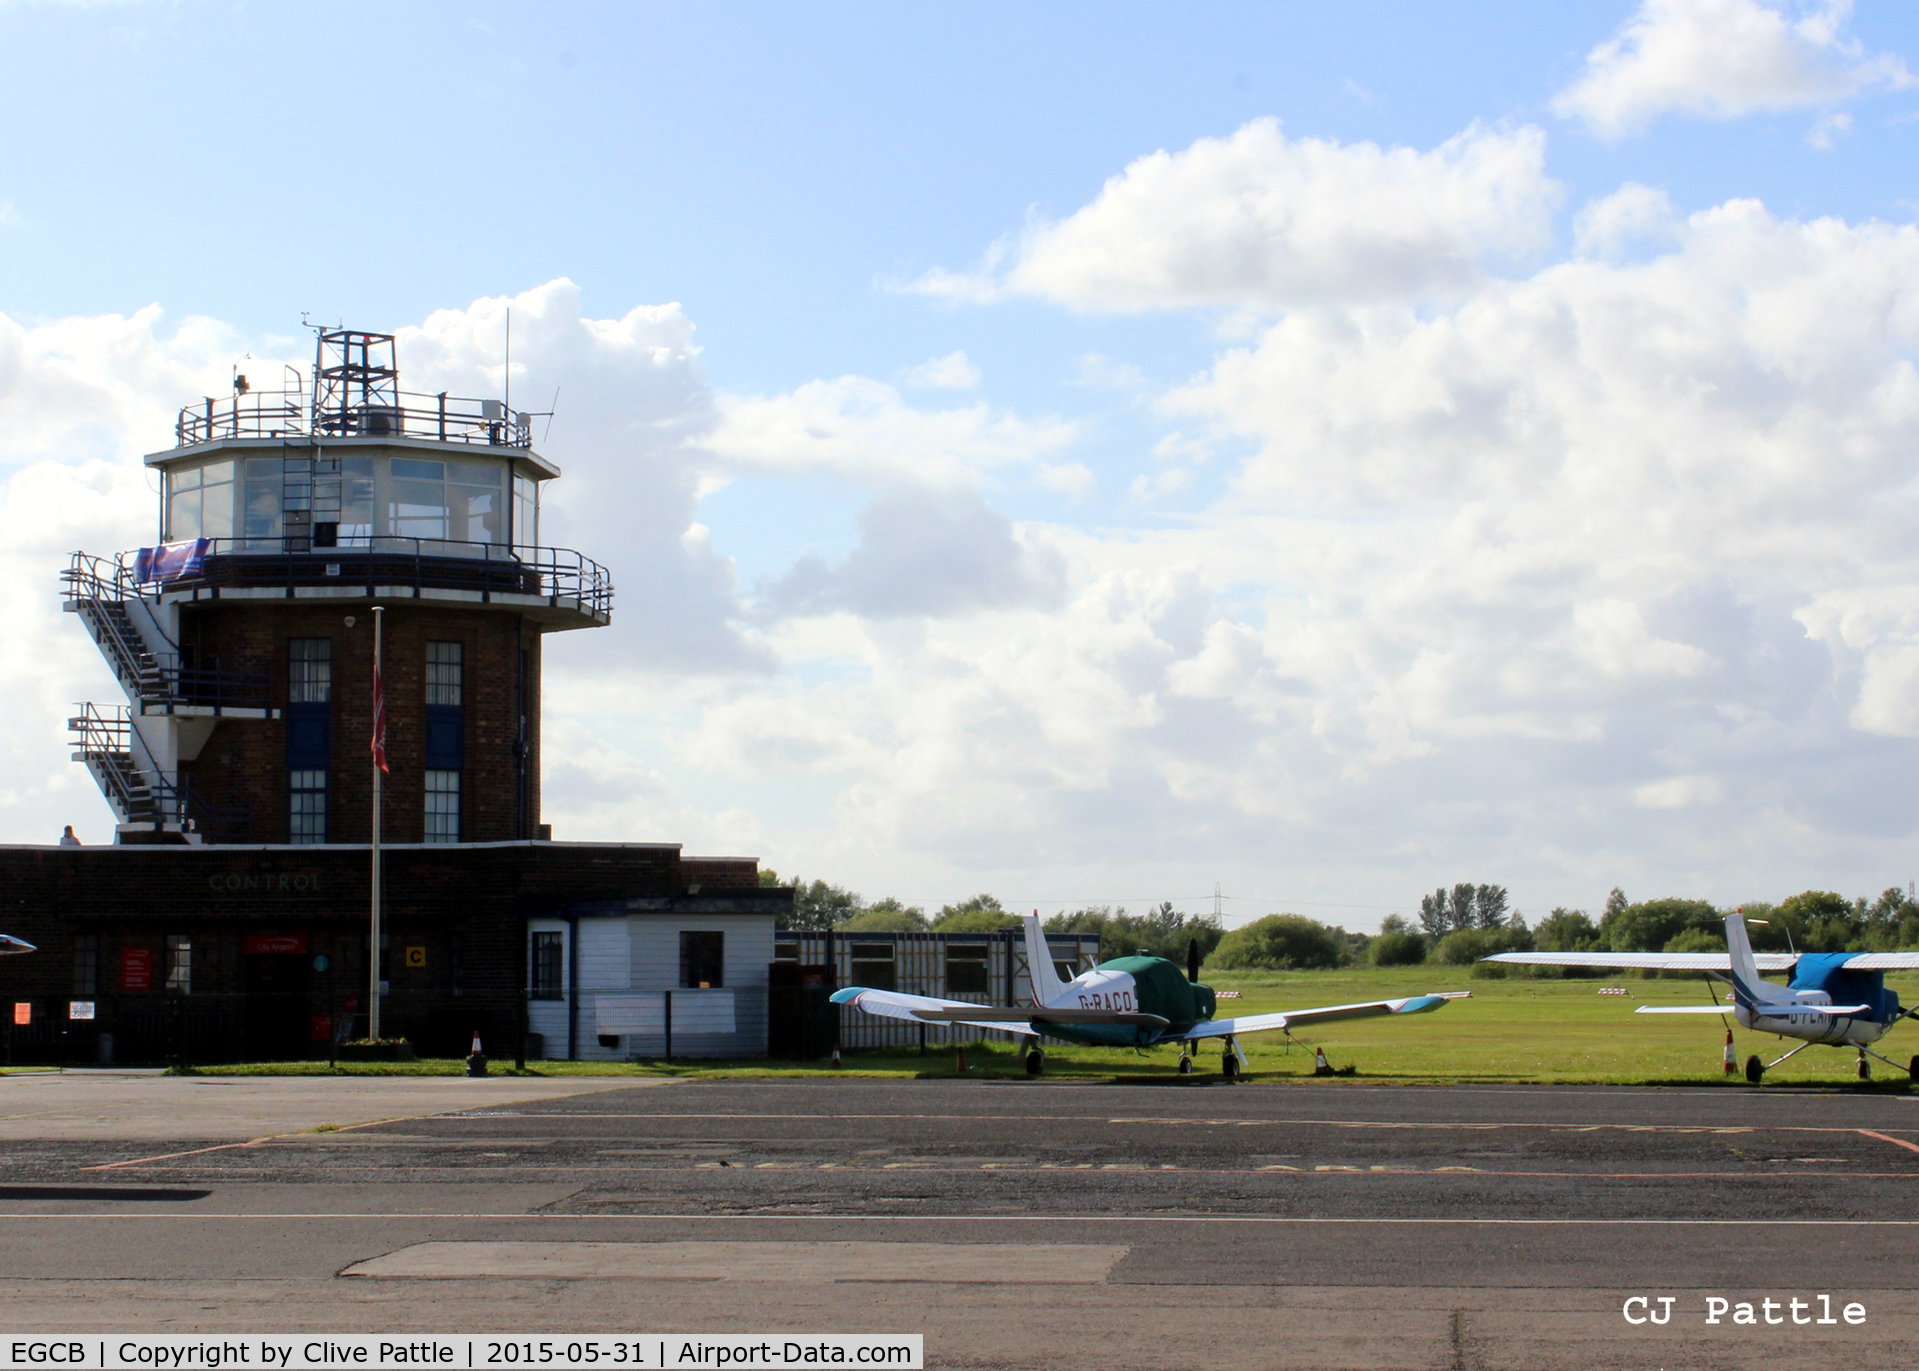 City Airport Manchester, Manchester, England United Kingdom (EGCB) - 1930's Tower view at Barton, Manchester City Airport, EGCB